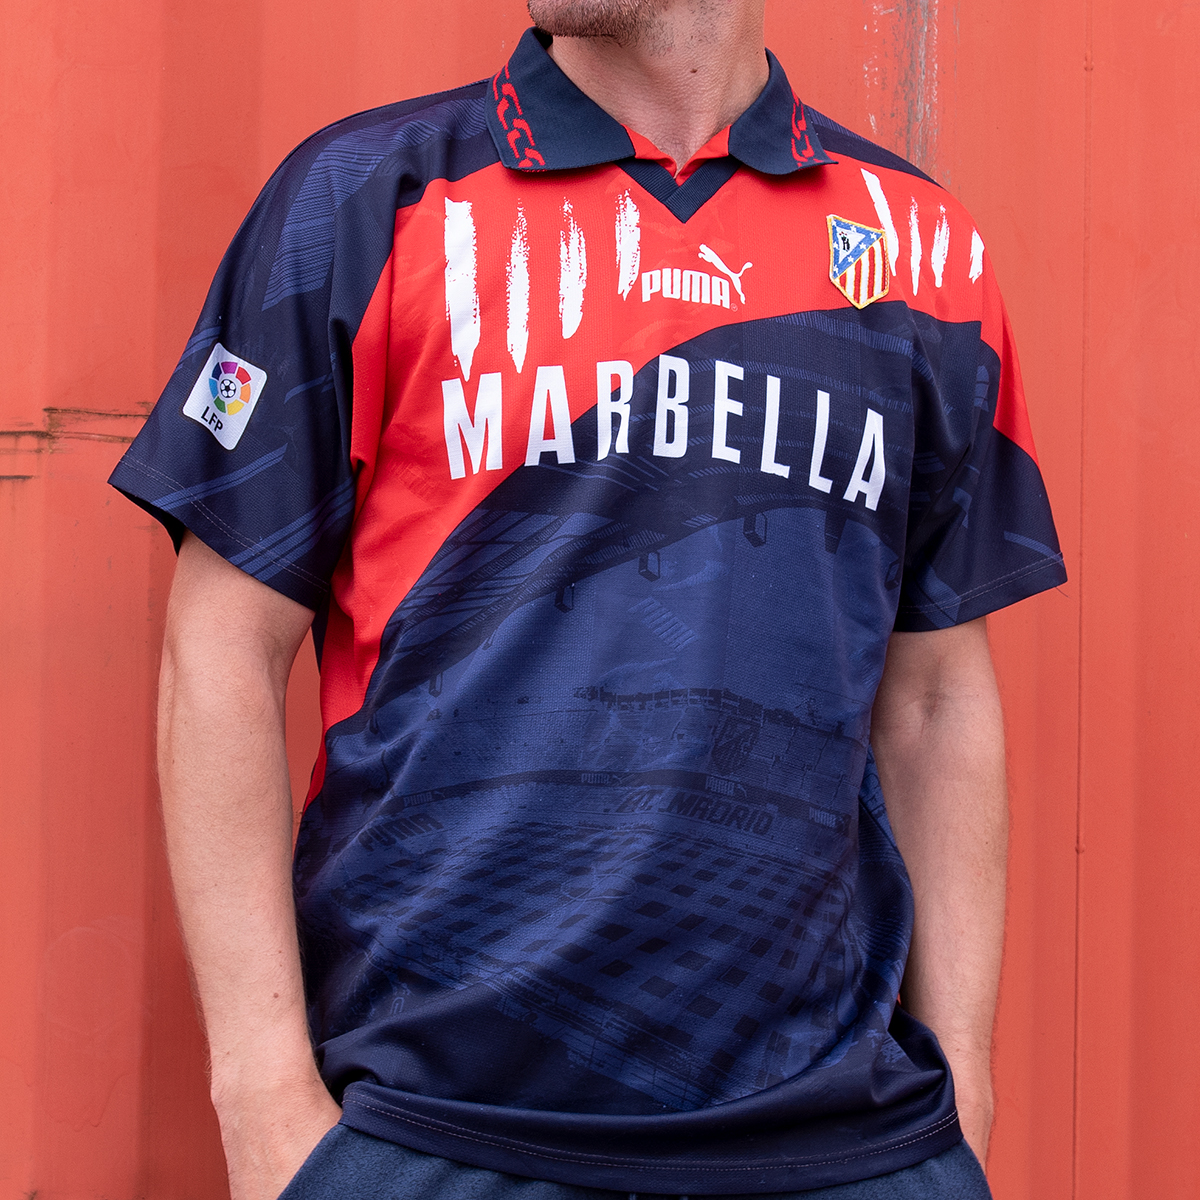 Classic Shirts on Twitter: "Atlético Madrid 1995 Away by Puma 🇪🇸 Featuring the Vincente Calderón within the design! Hitting the site on June 15th! https://t.co/eKhcaikyBo" Twitter